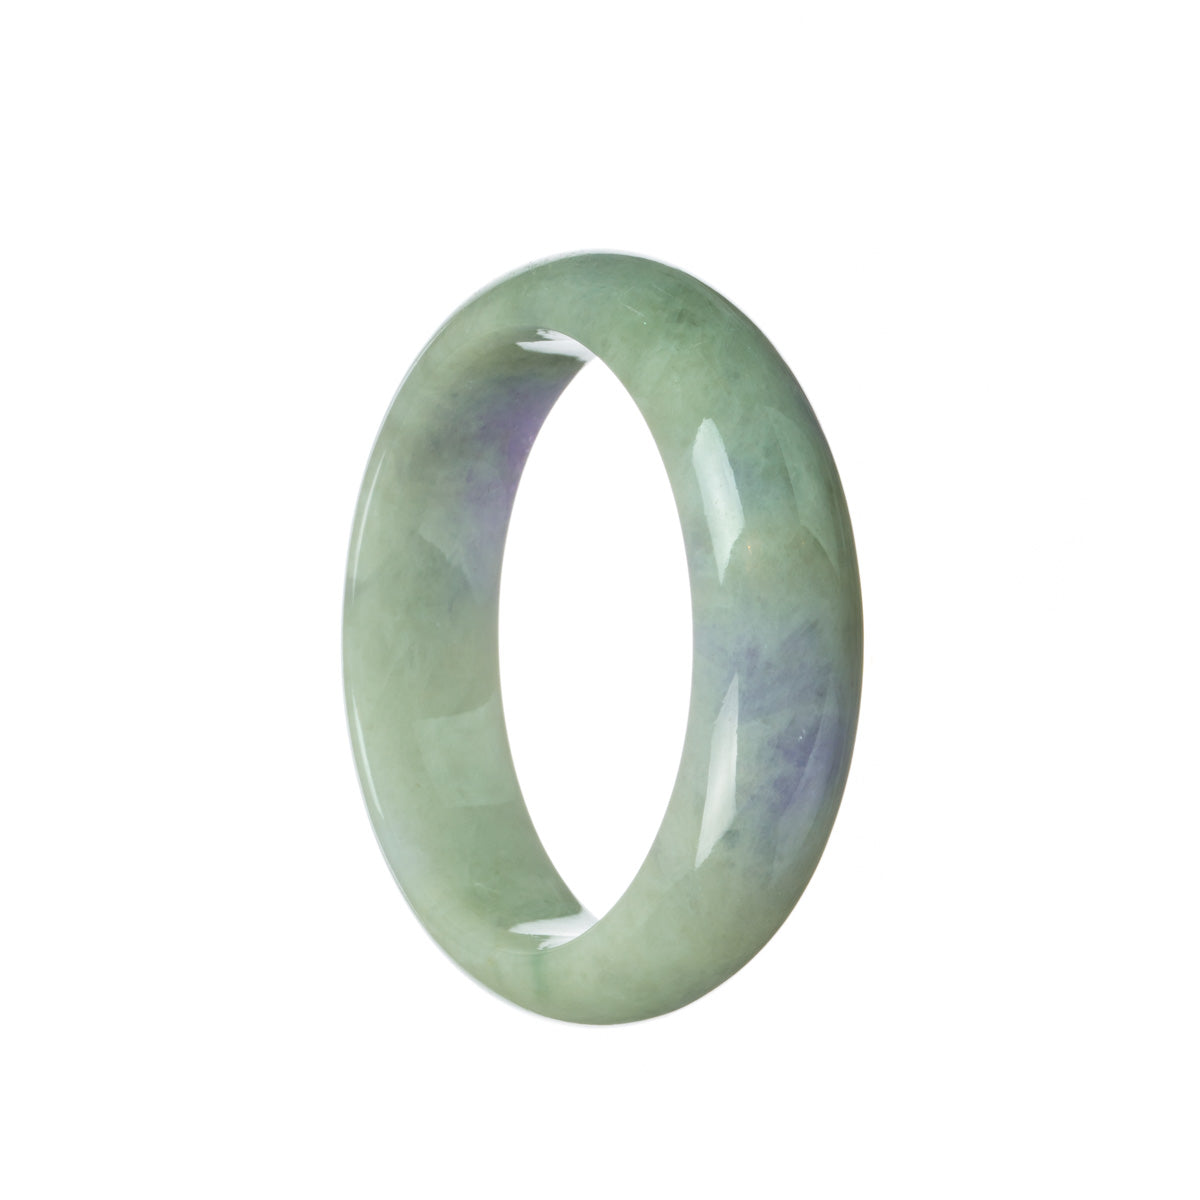 A half-moon shaped jade bangle bracelet in a certified natural green color with lavender accents.